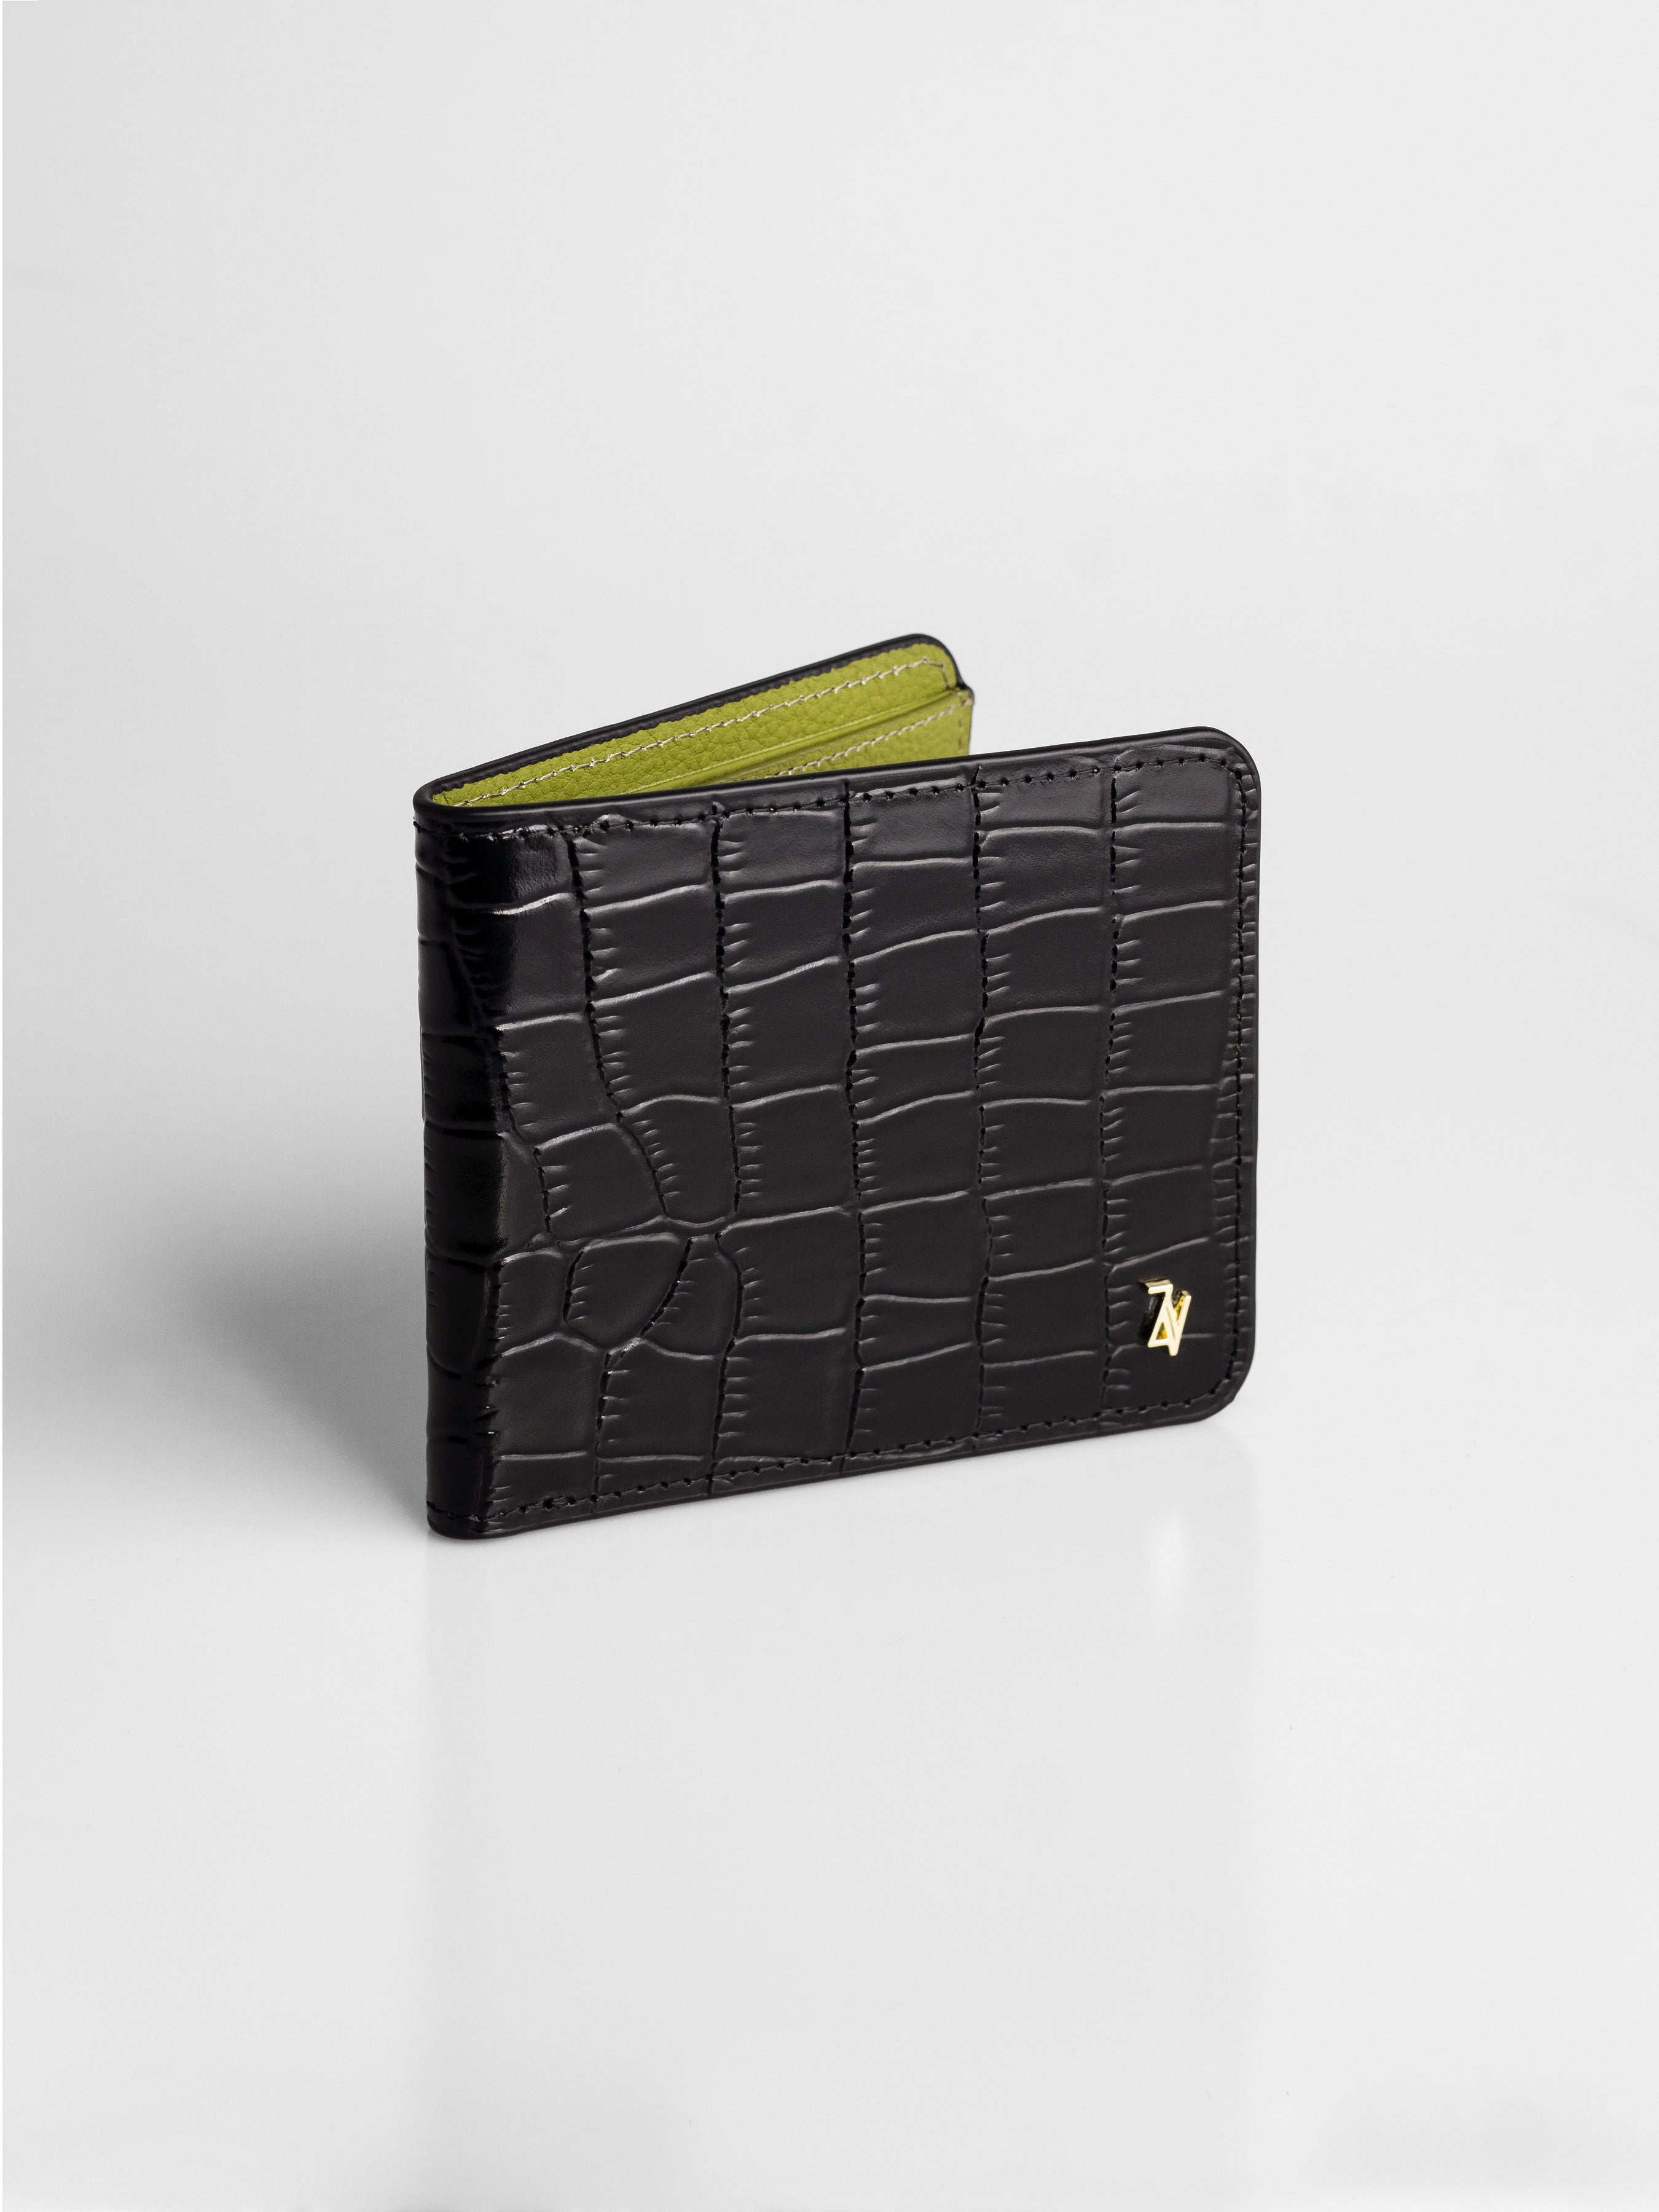 Artemis Croco Wallet - Black and Olive Green Leather